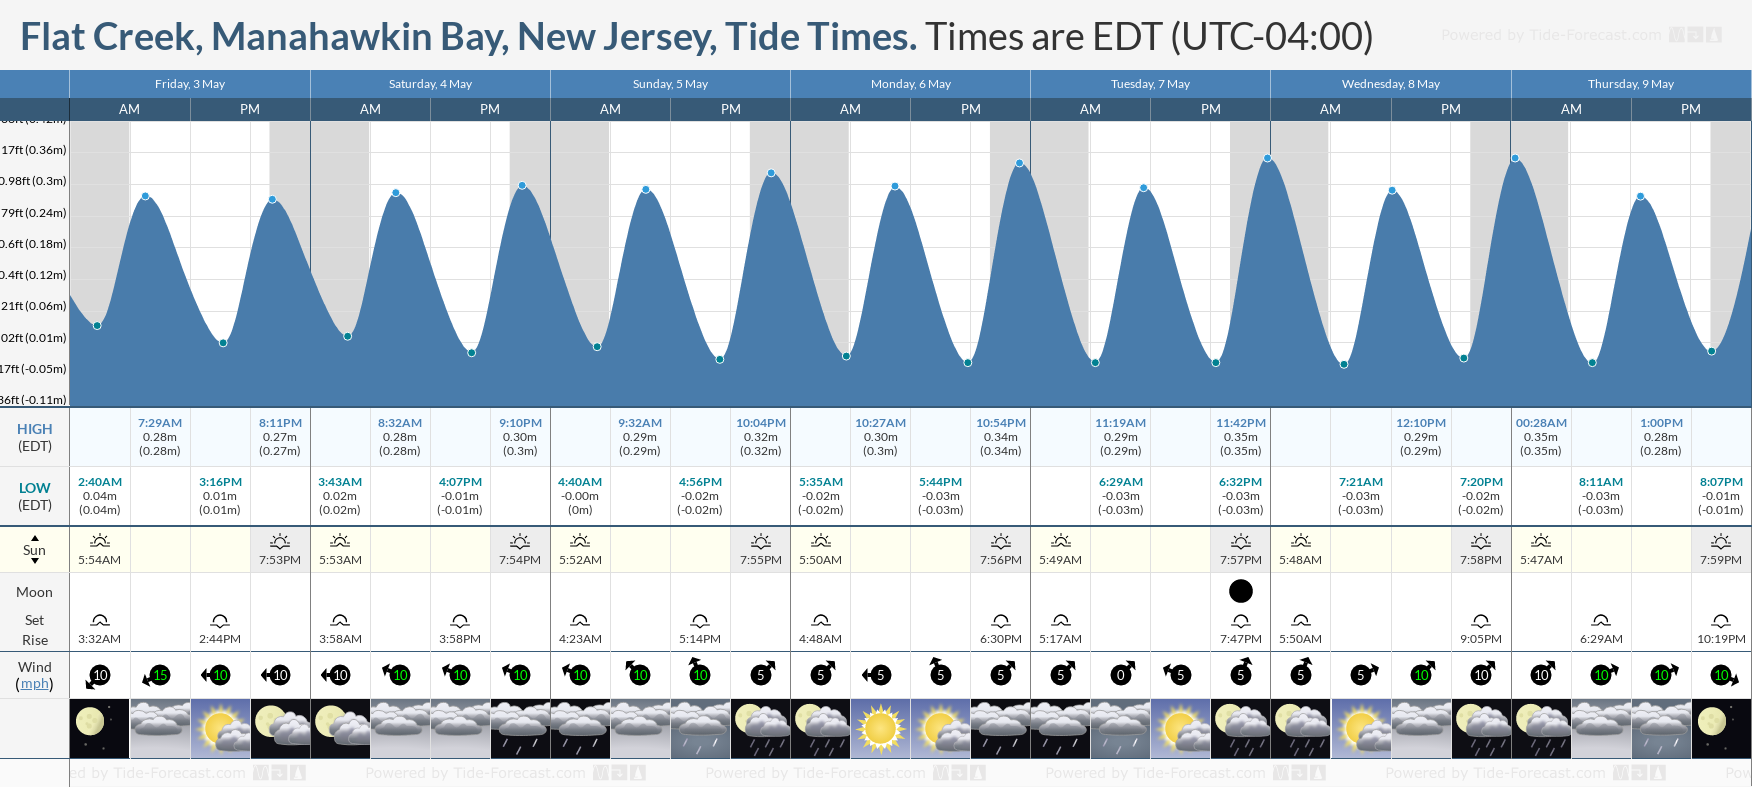 Flat Creek, Manahawkin Bay, New Jersey Tide Chart including high and low tide tide times for the next 7 days